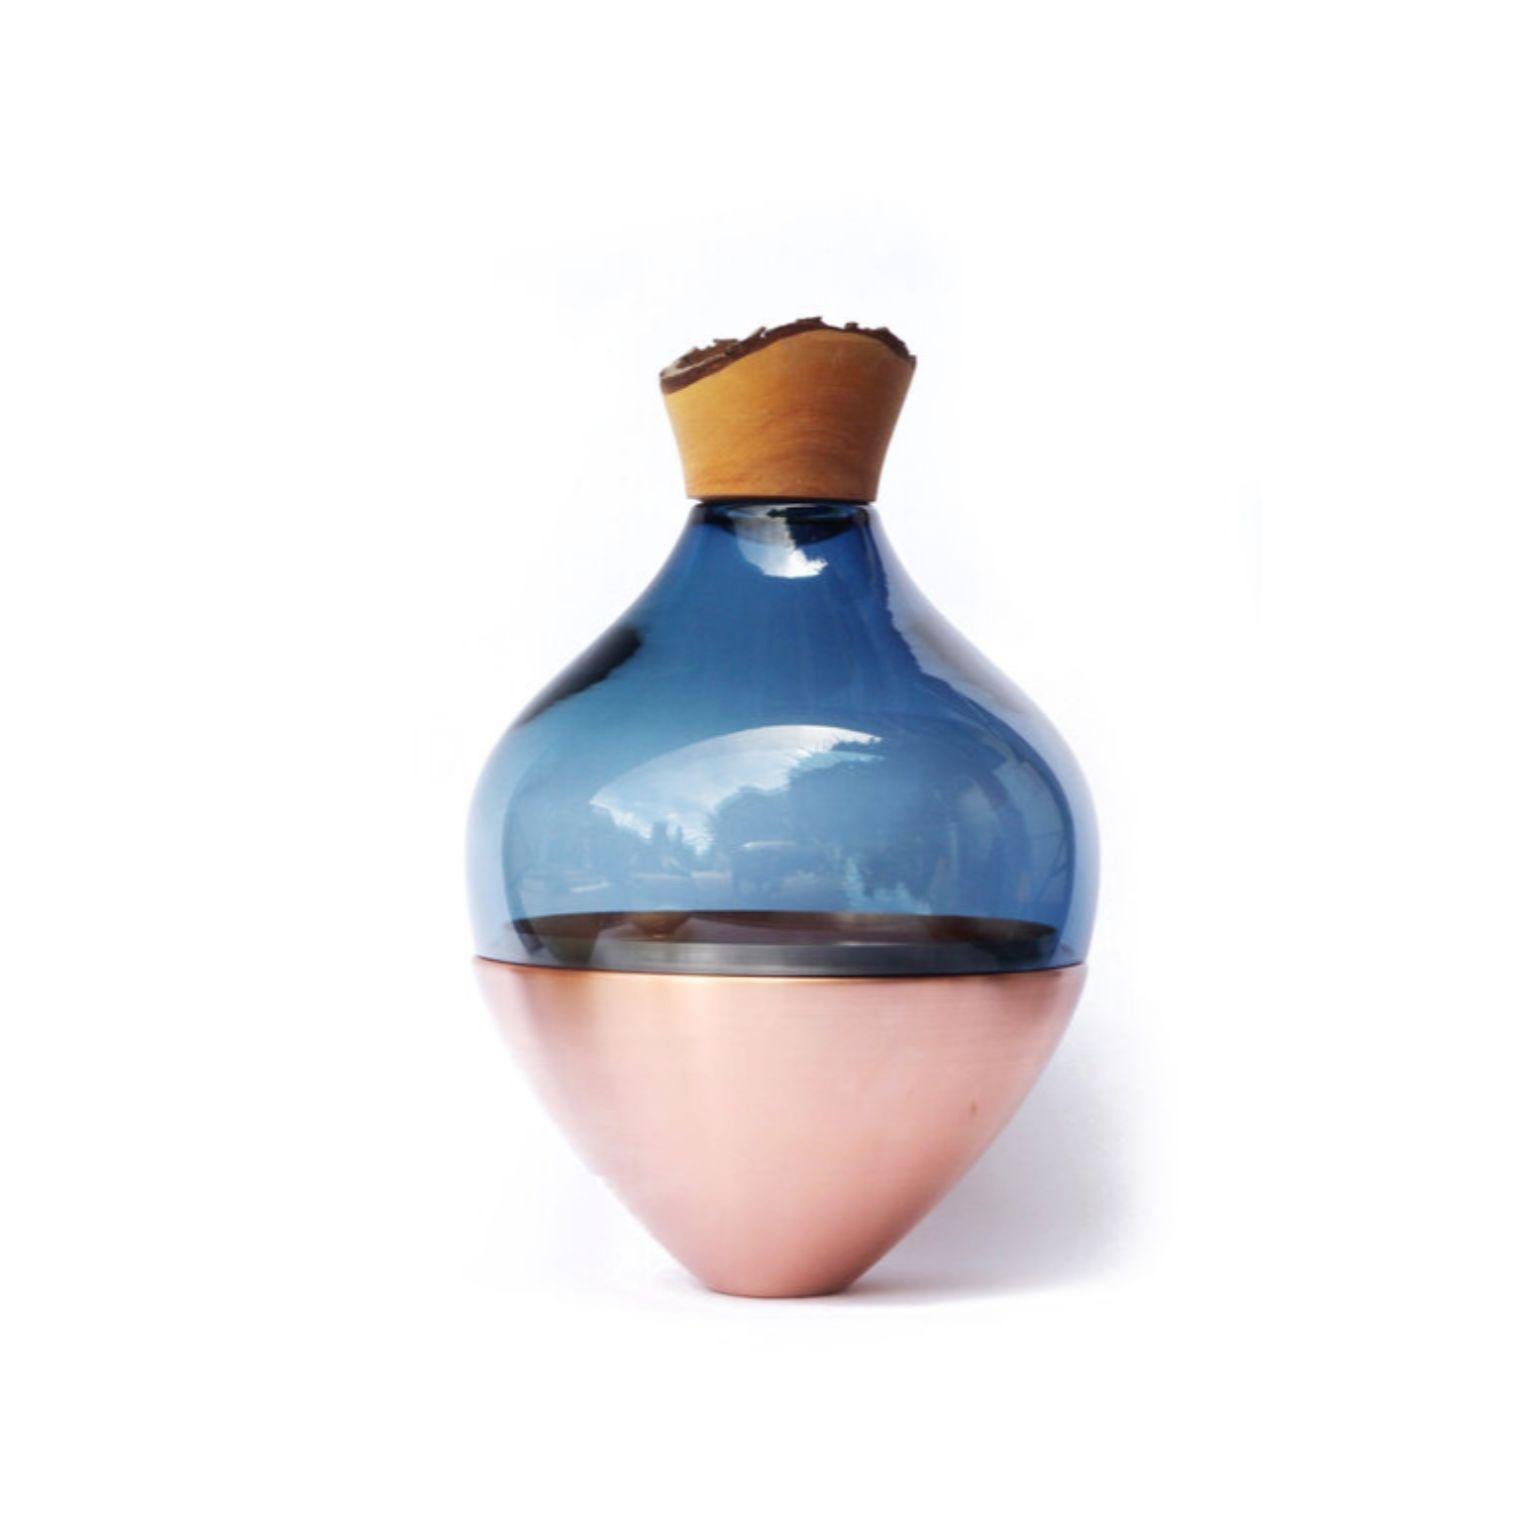 Blue and copper sculpted blown glass, Pia Wüstenberg
Dimensions: Height 20 x diameter 38cm
Materials: Hand blown glass, Copper

Pia Wüstenberg, Utopia
Pia Wüstenberg is a creative with a passion for materials and craft. She graduated from the Royal